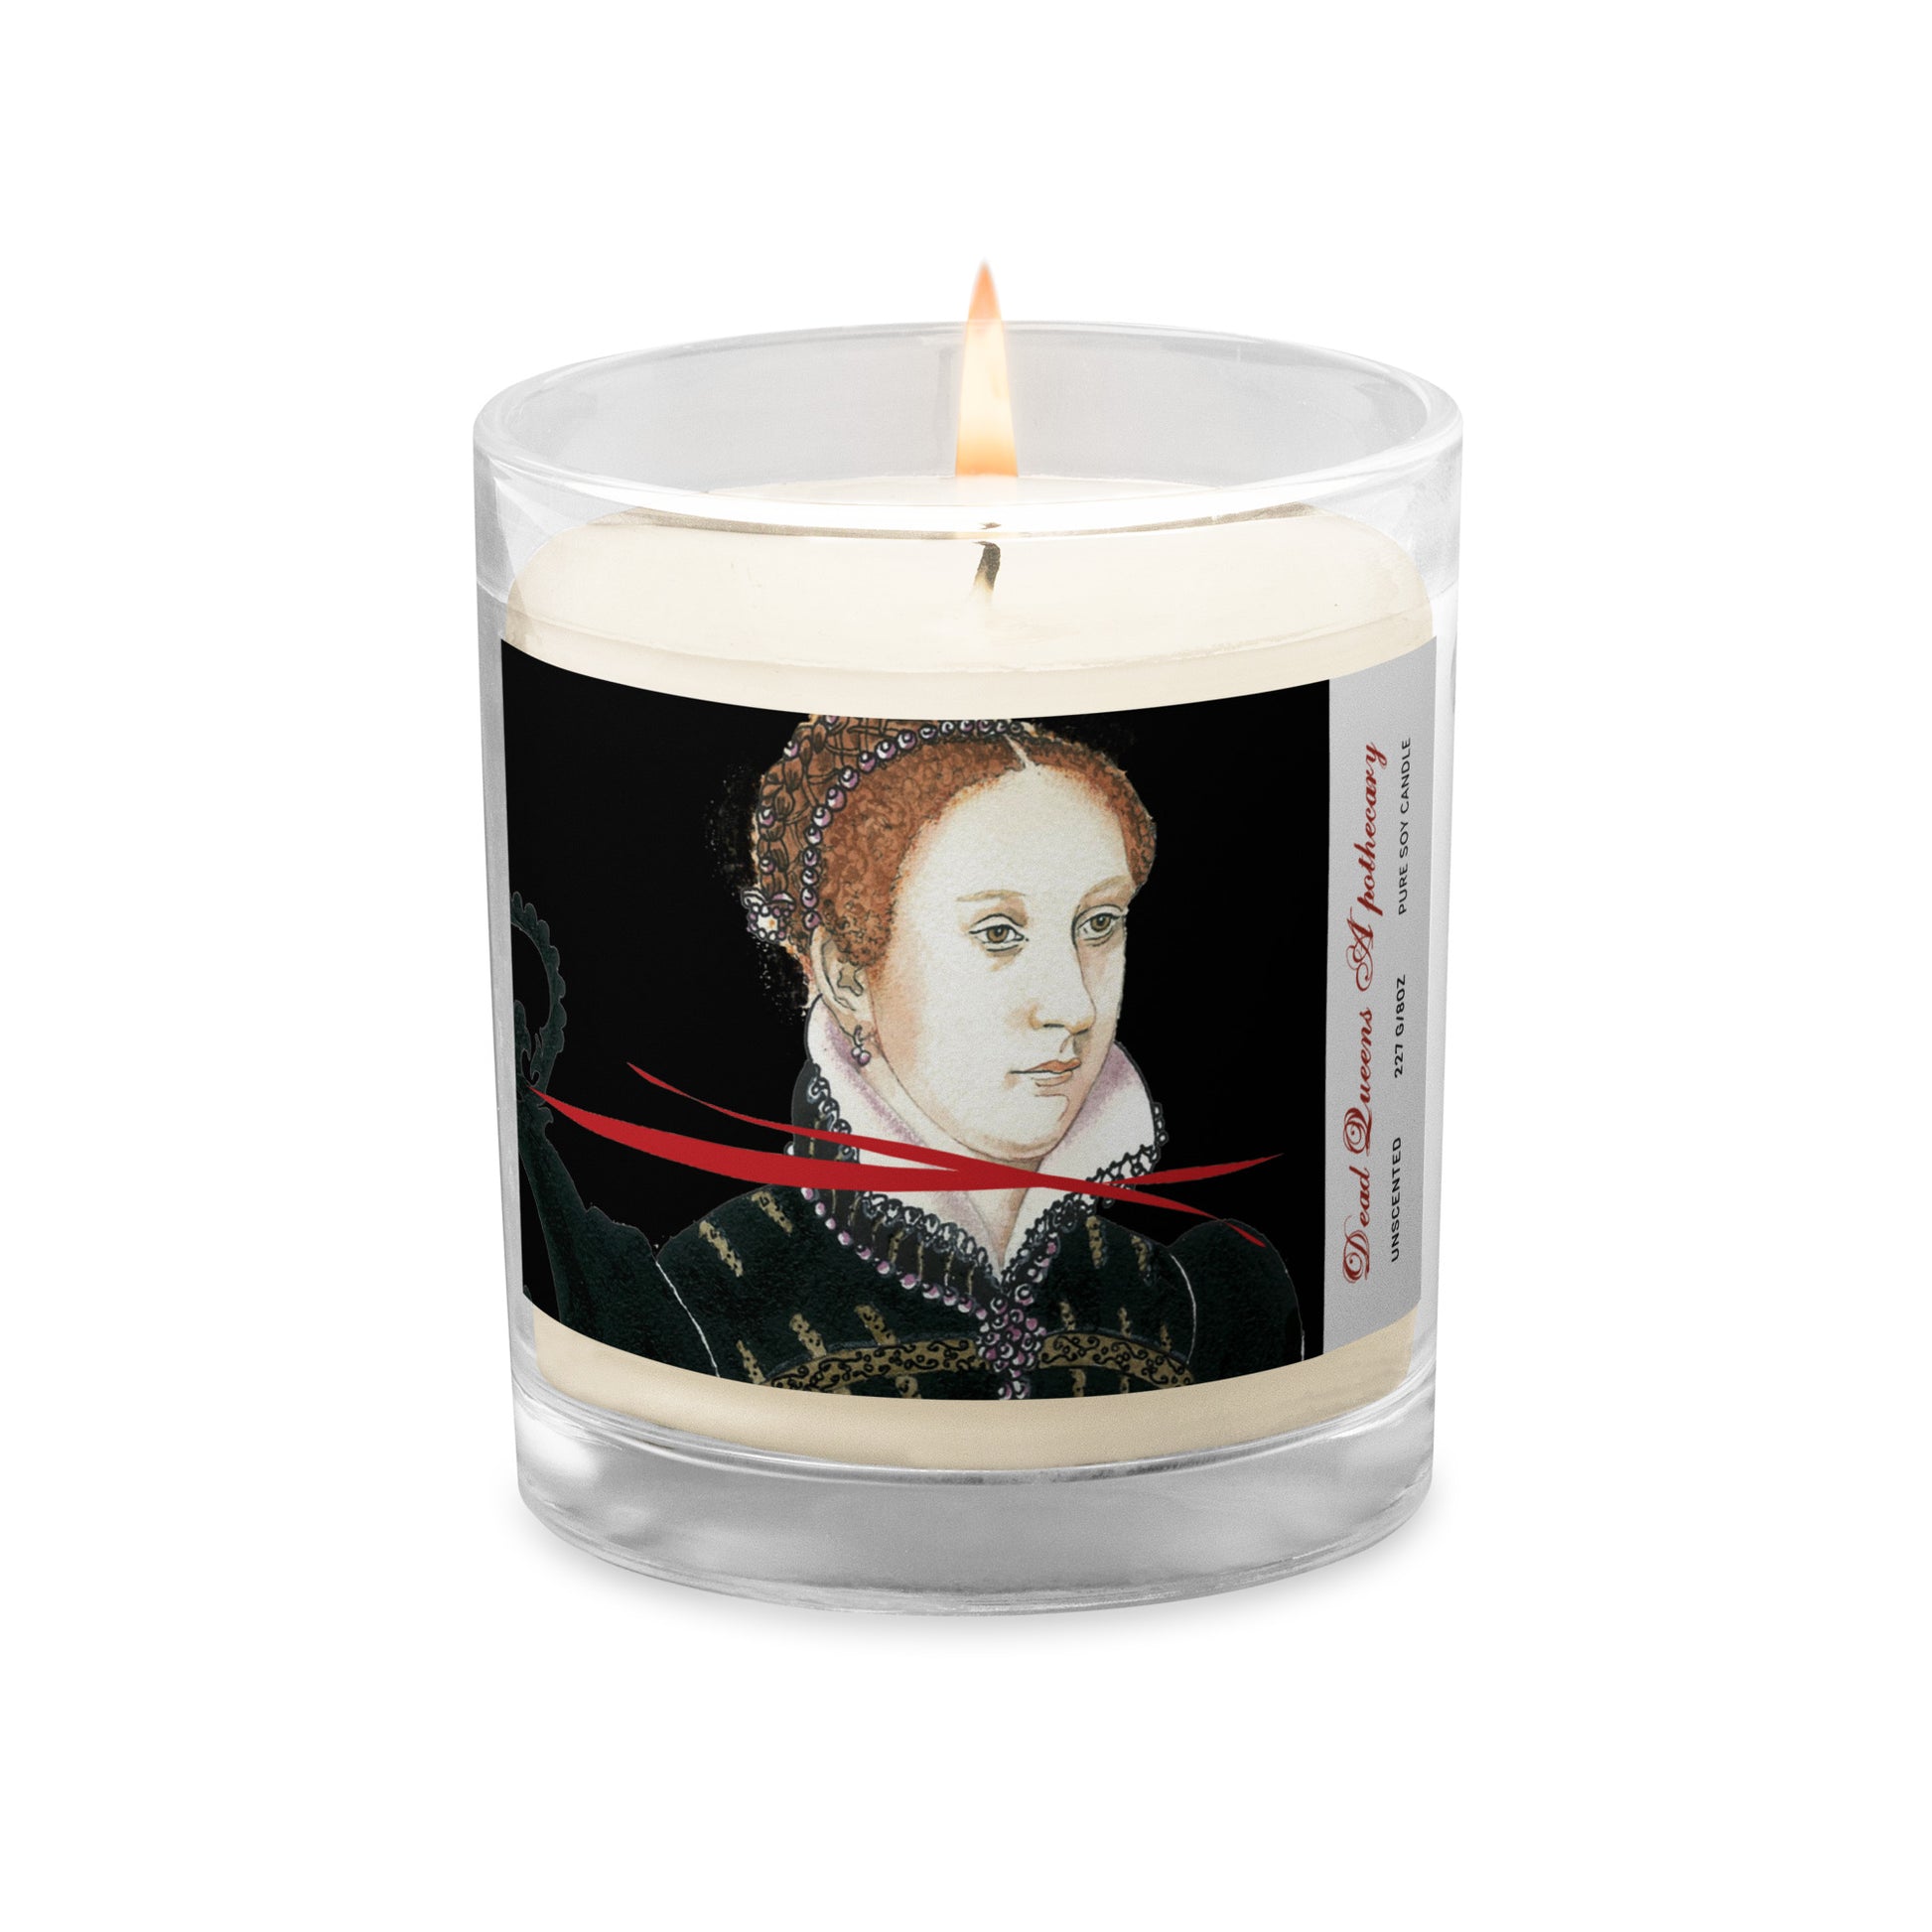 Mary Queen of Scots Reign Candle - Dead Queens